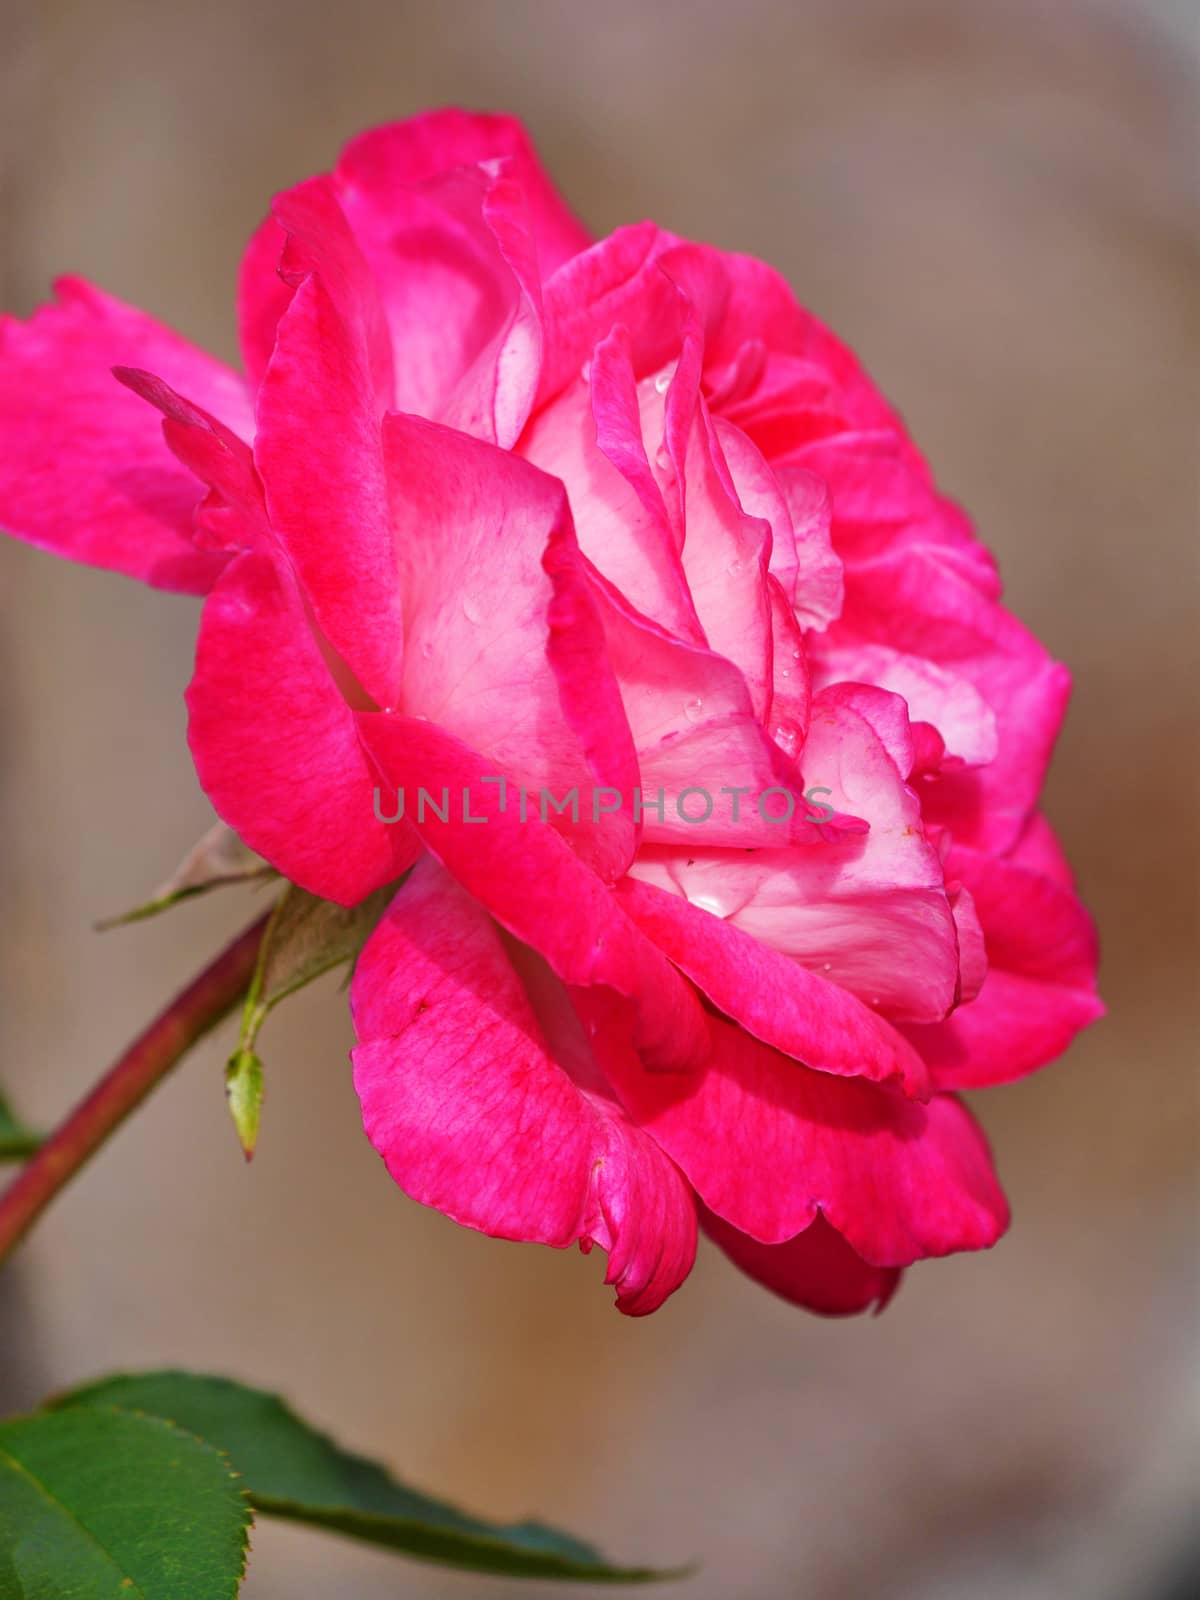 fresh rose with white base of petals and pink veins